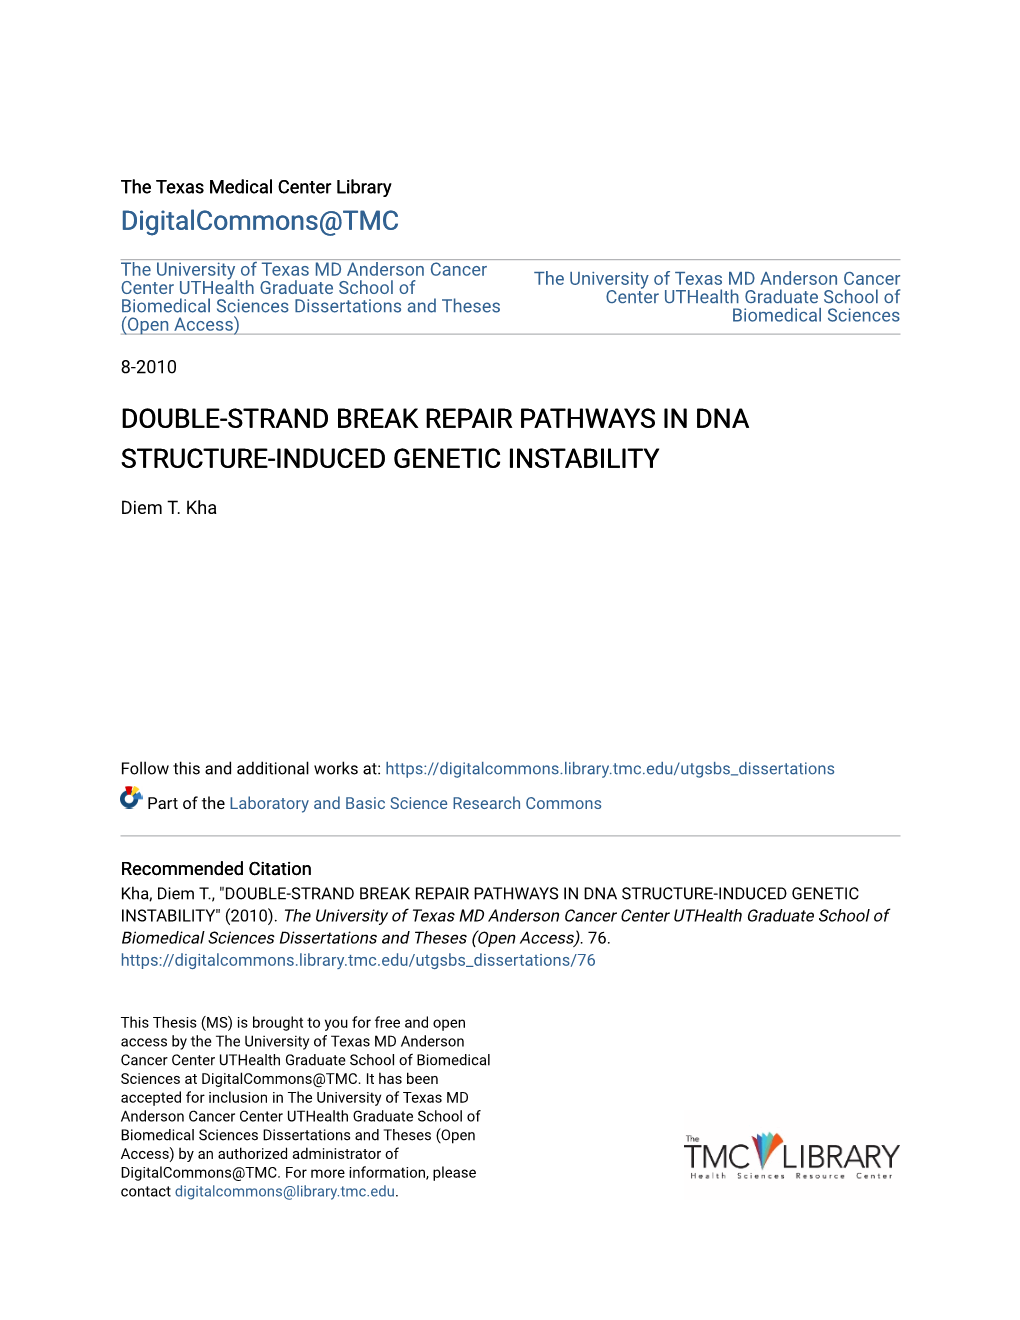 Double-Strand Break Repair Pathways in Dna Structure-Induced Genetic Instability